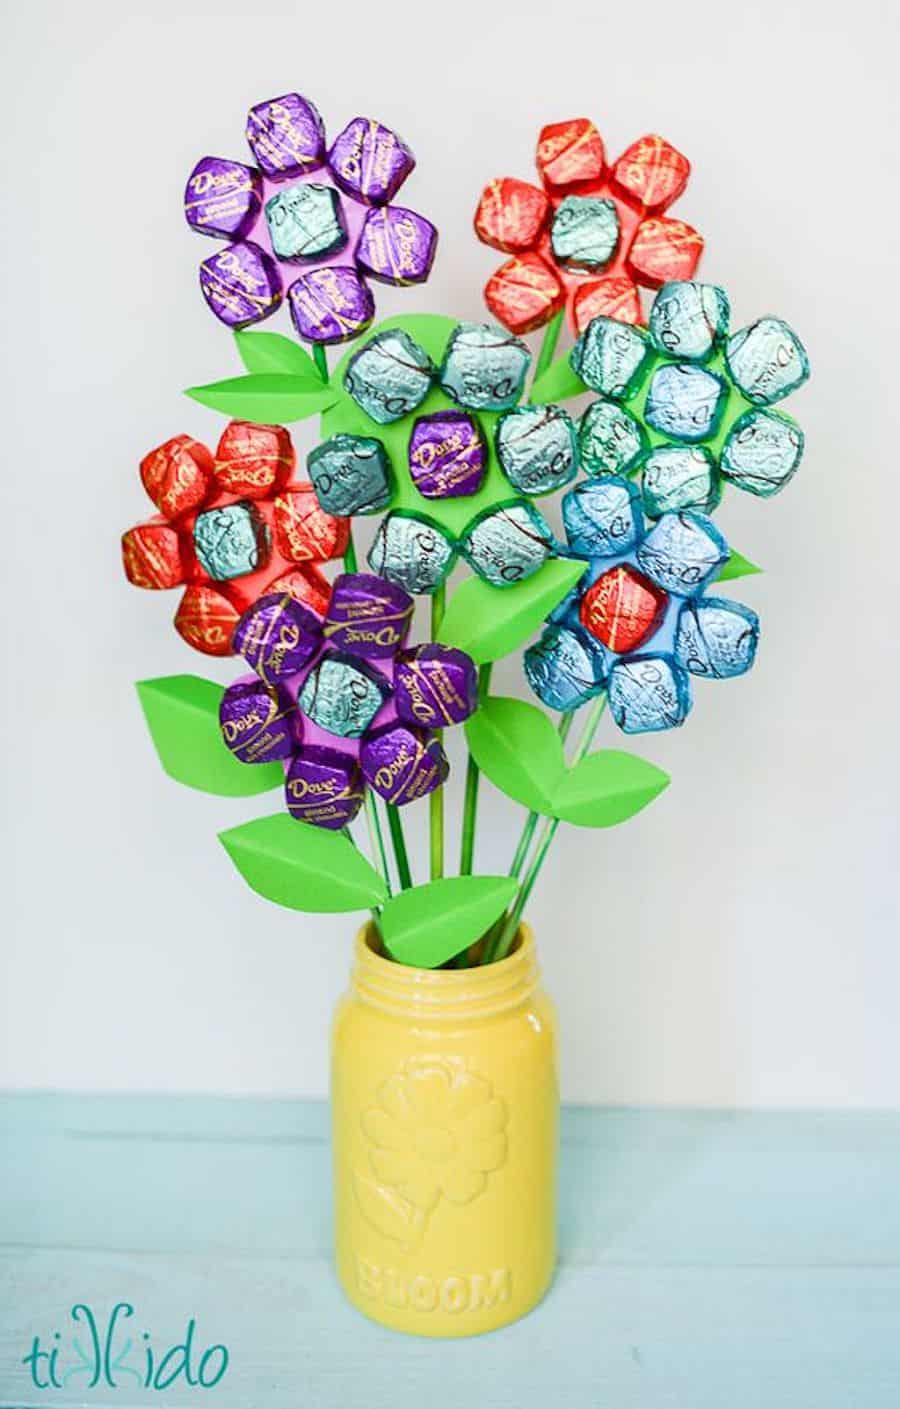 Delightful candy flowers